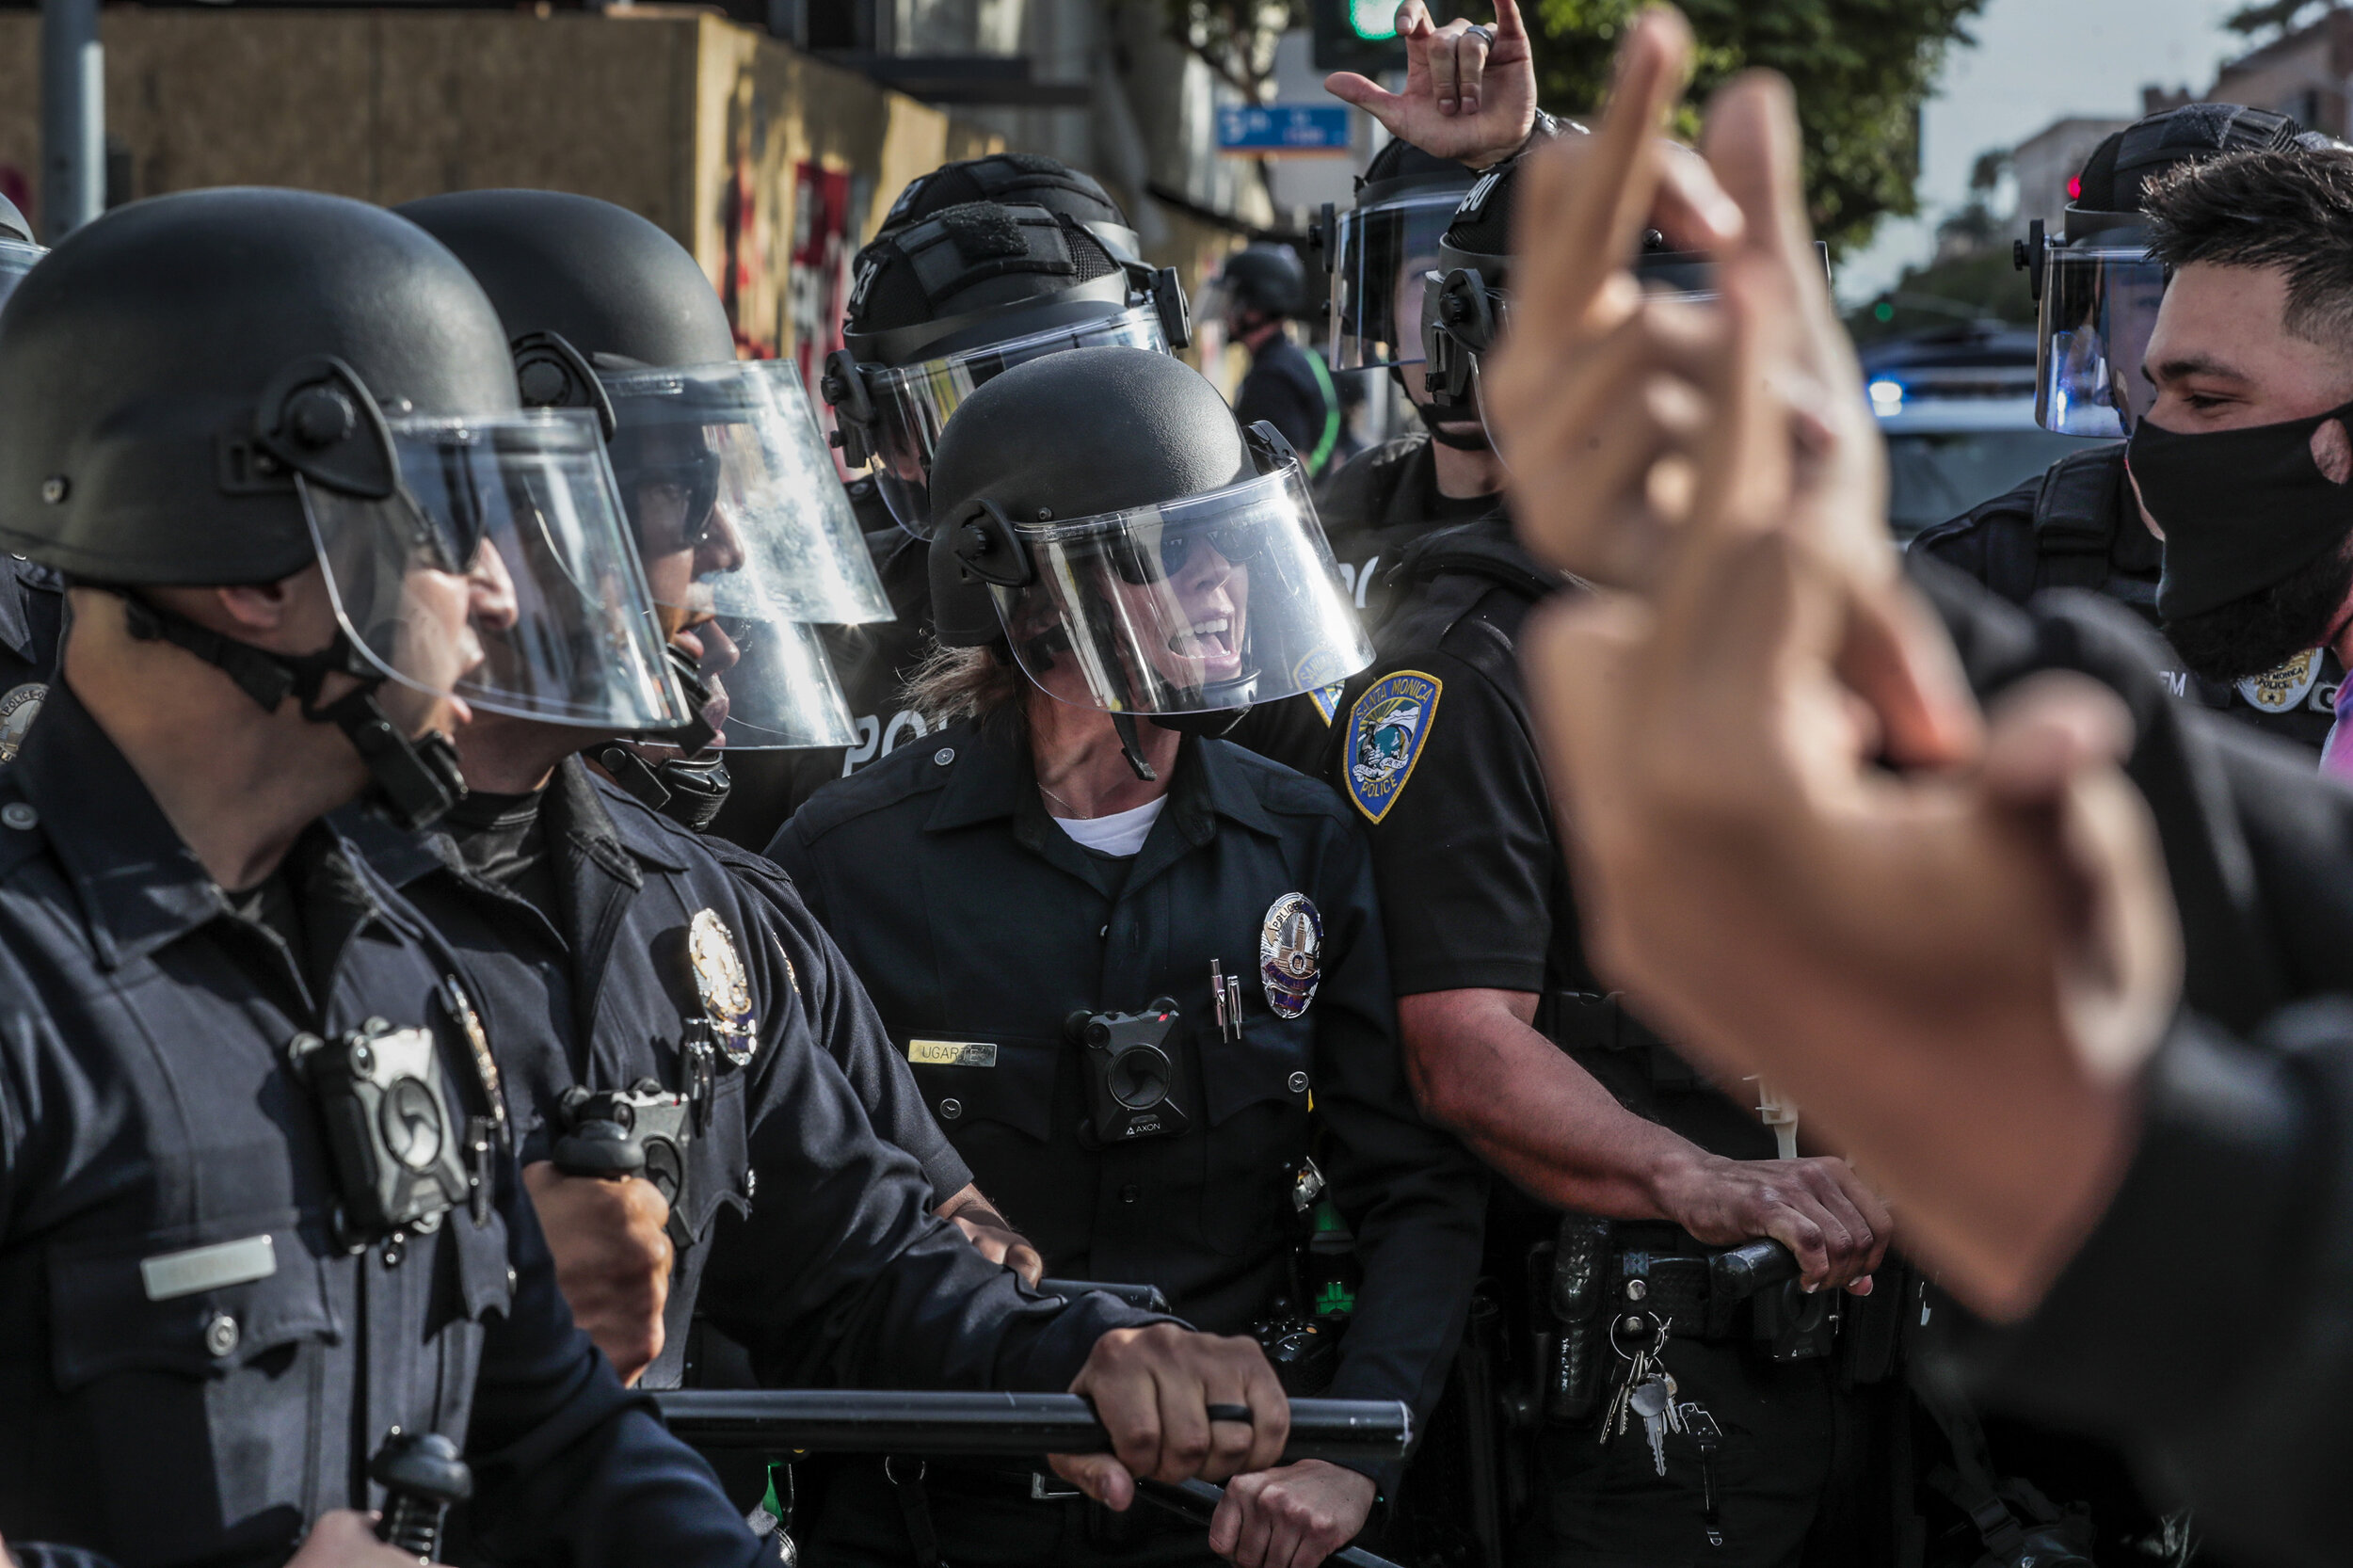  Los Angeles police officer Mayra Ugarte screams at protesters to move back as she and fellow officers attempt to restore order after Santa Monica businesses were vandalized and looted as unrest continues in the wake of the death of George Floyd. Acc